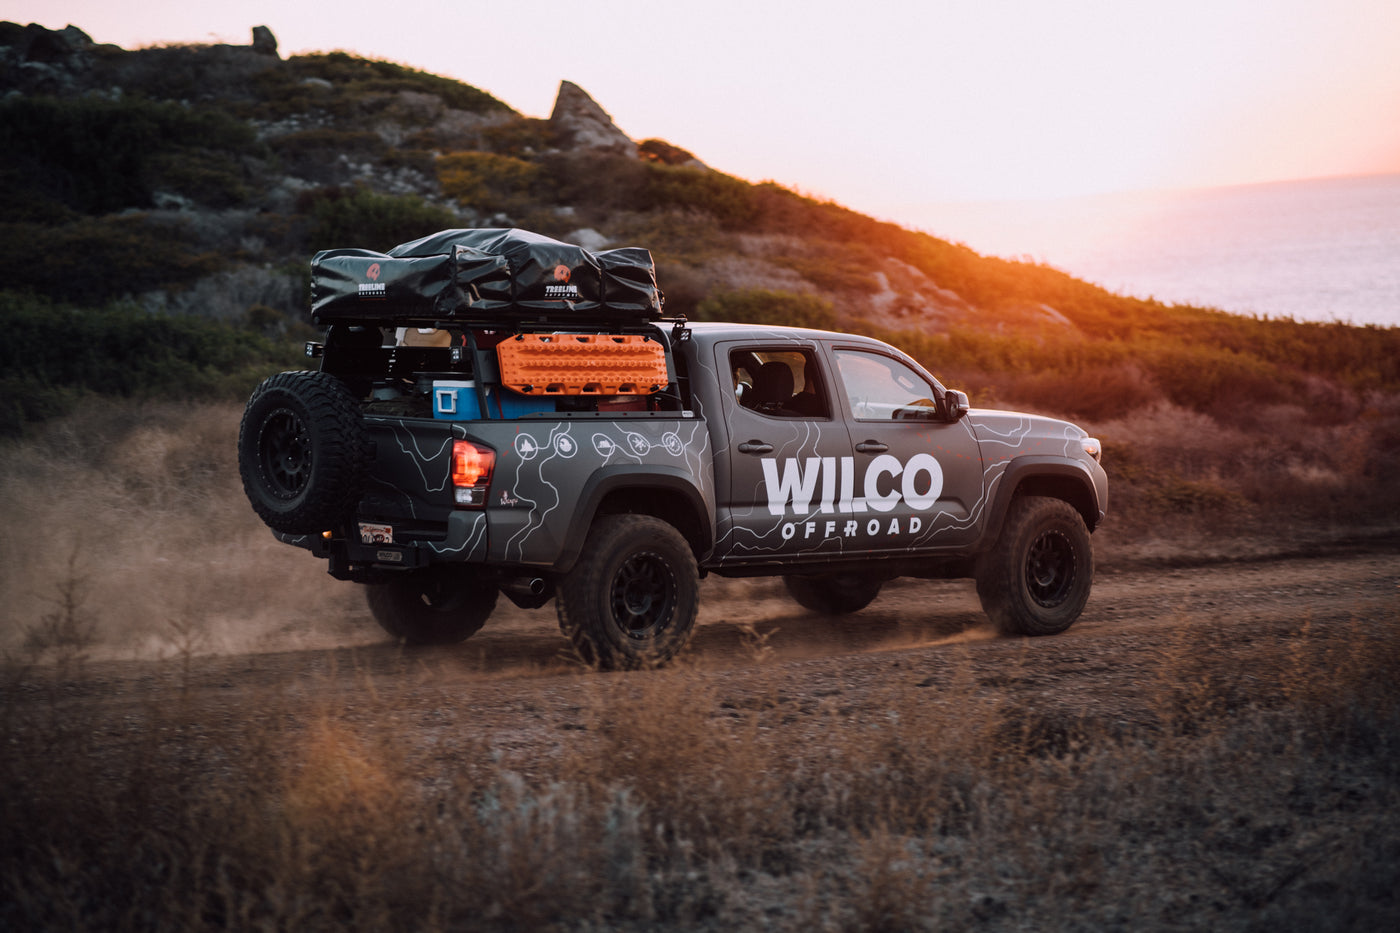 Wilco Offroad - USA Made Offroad and Overland Gear